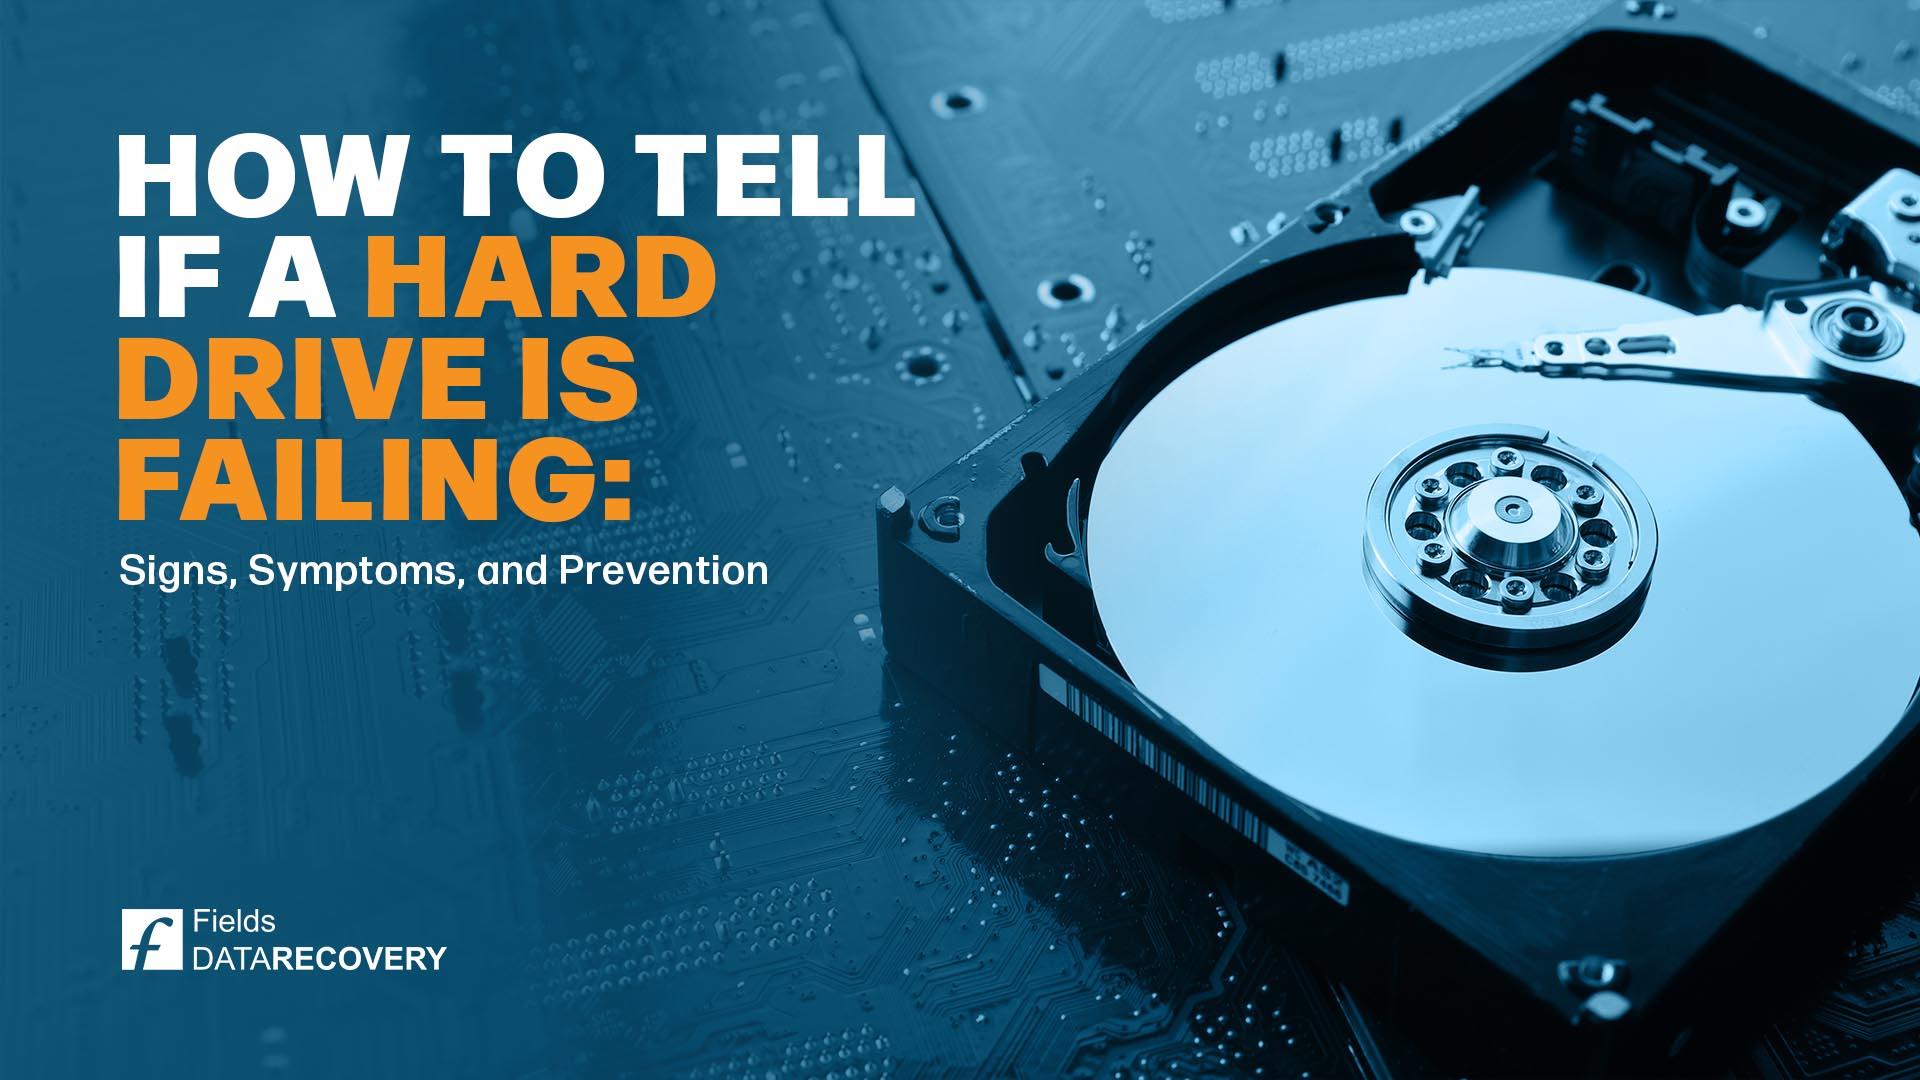 How to Tell If a Hard Drive Is Failing: Signs, Symptoms, and Prevention